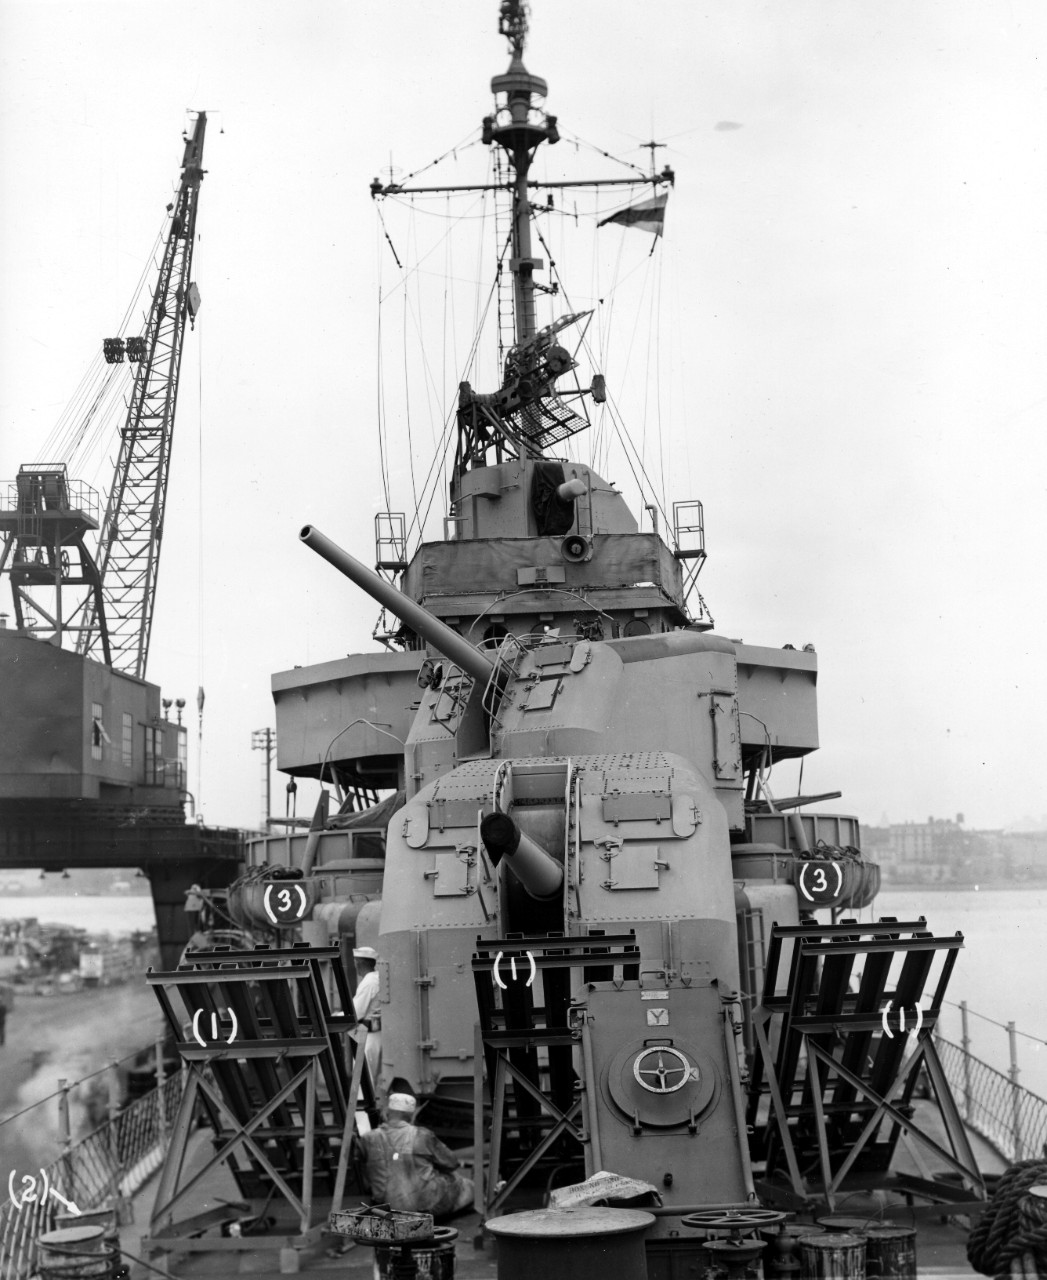 Looking aft from Glennon’s forecastle during a period of repairs and alterations at the New York Navy Yard, 3 September 1943. Note three prominent “mousetrap” anti-submarine rocket launchers, so named because of the obvious similarity with the ro...